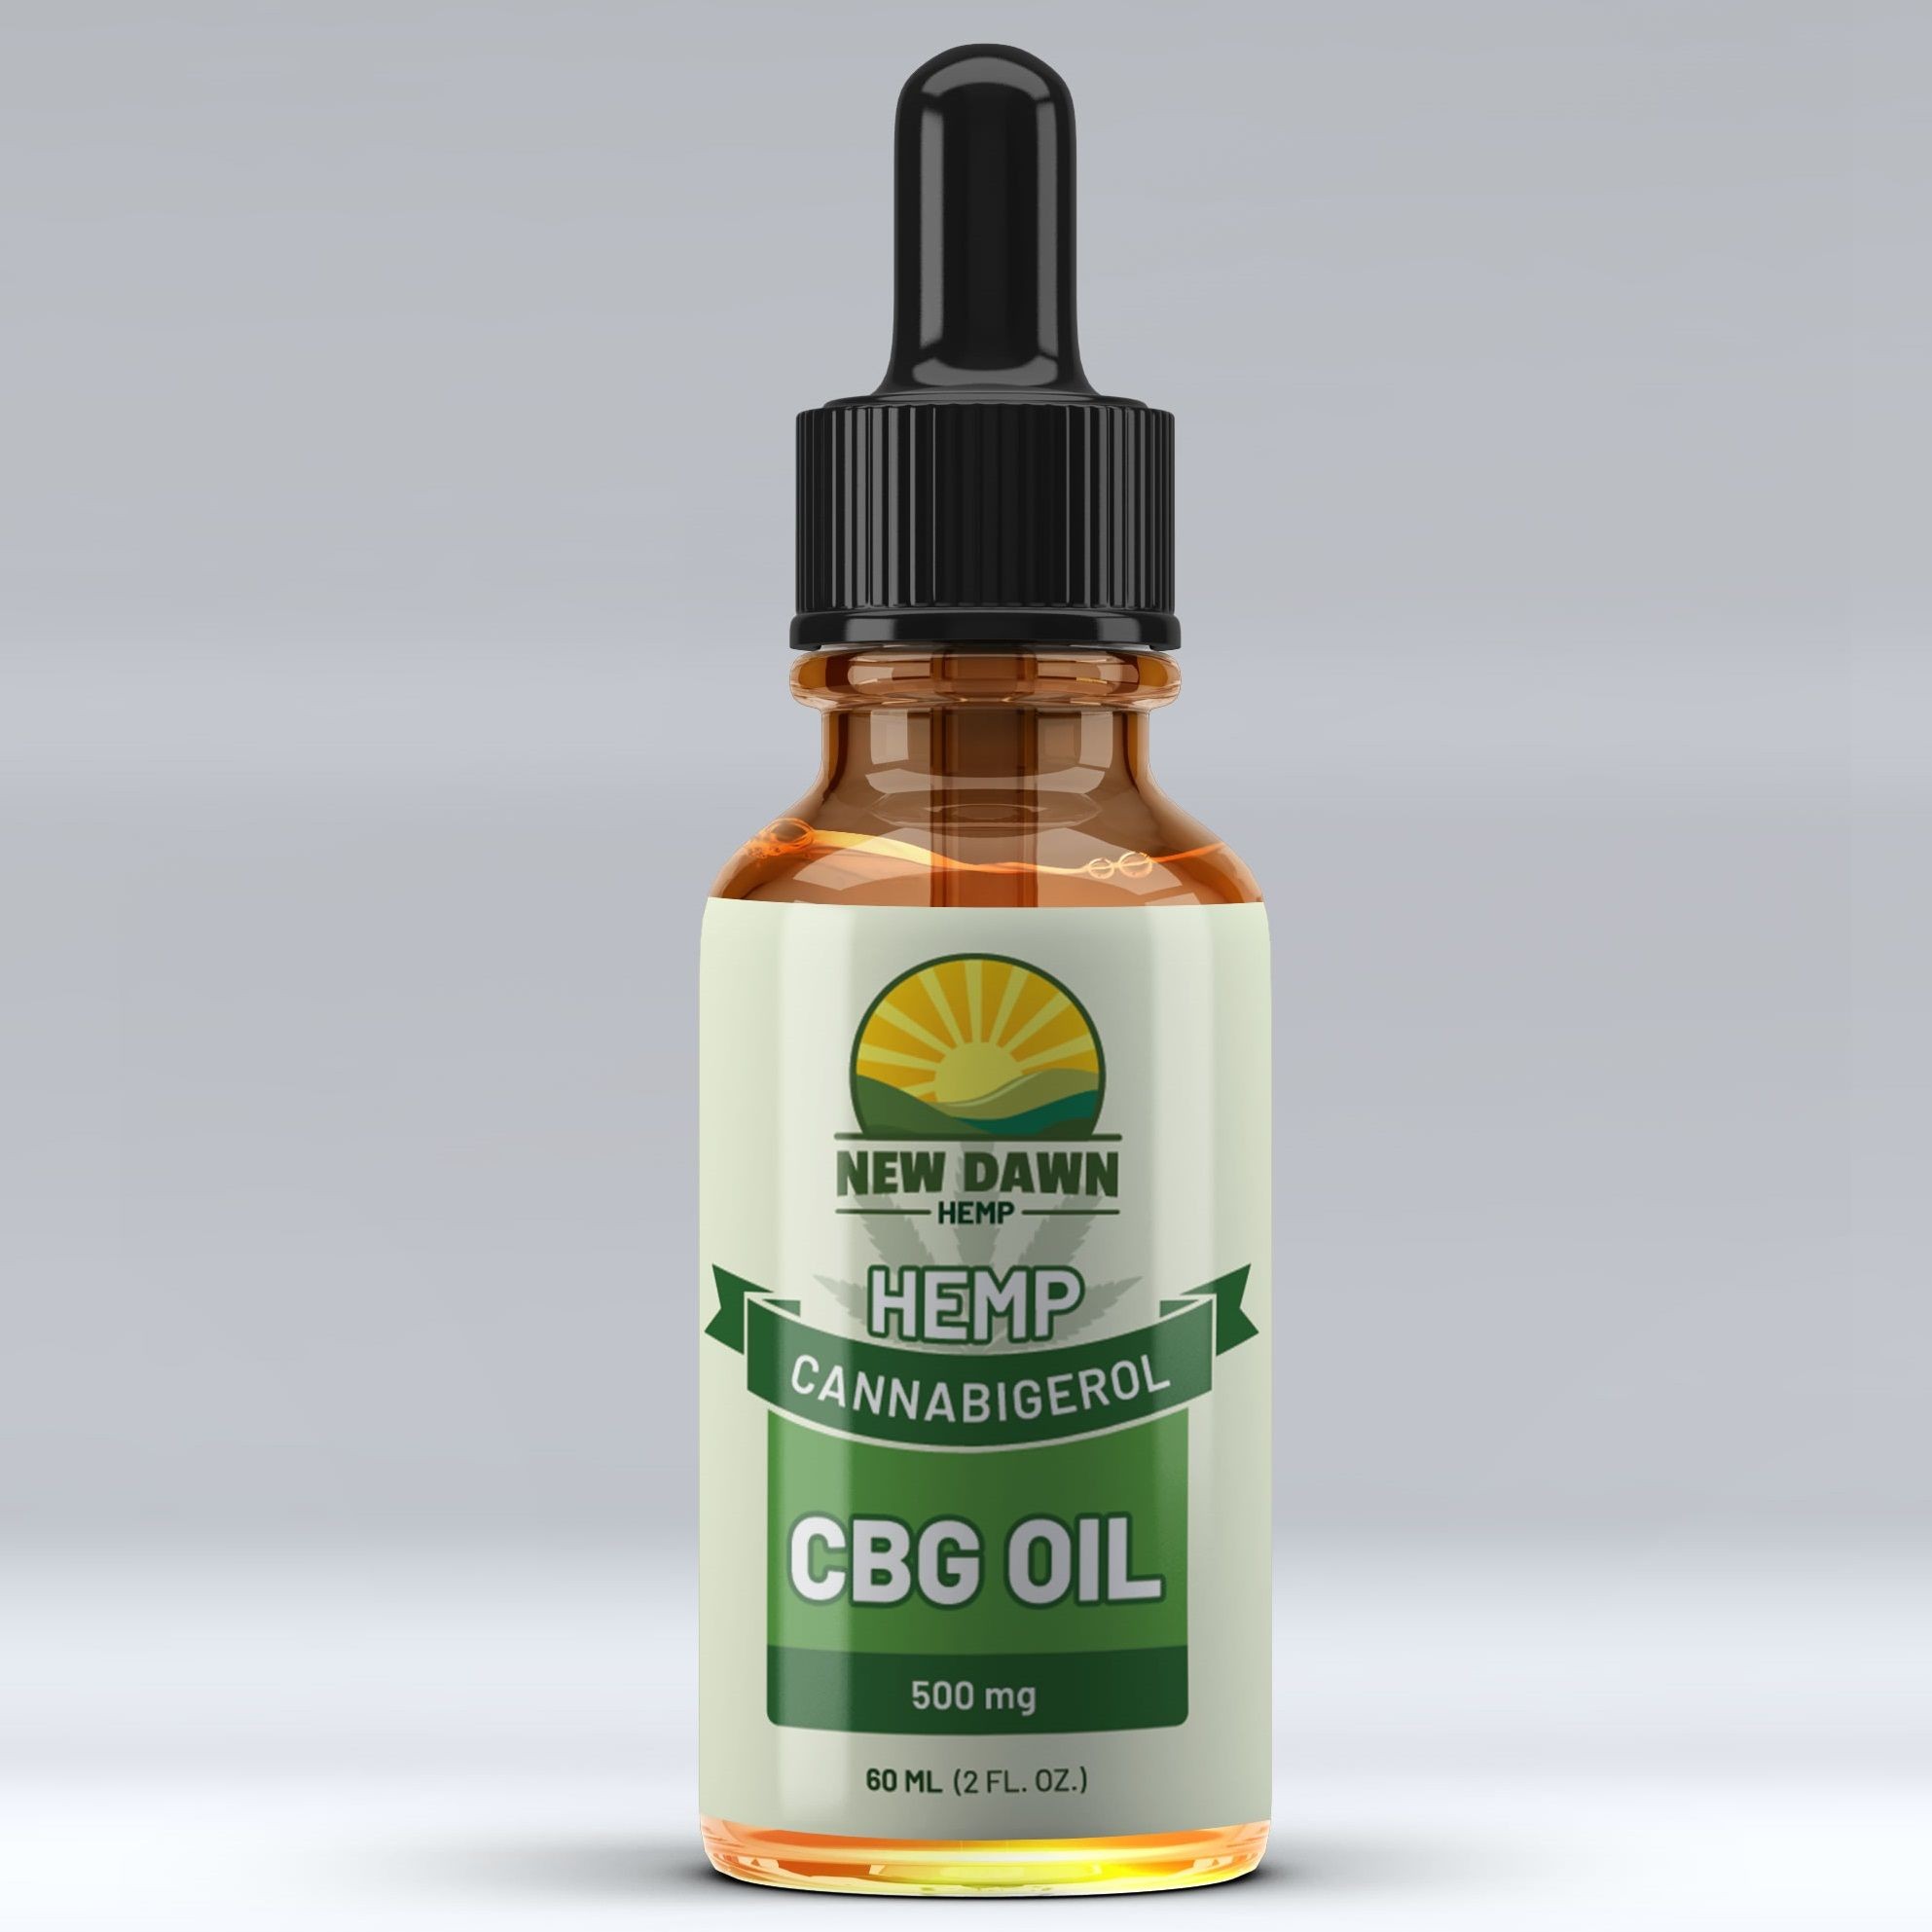 Cbg Products Uk - Cbg|Gummies|Cbd|Effects|Thc|Cannabinoid|Hemp|Cannabinoids|Image|Products|Courtesy|Product|Way|Benefits|Dosage|Everyone|Oil|People|Spectrum|Others|Gummy|Time|Dosages|Advantages|Cannabis|Results|Treatment|Body|Stomach|Tincture|Pain|Drug|Approach|Isolate|Side|Dog|Ingredients|List|State|Cannabigerol|Cbg Gummies|Psychoactive Effects|Full Spectrum Gummies|Image Courtesy|Full-Spectrum Cbd Products|Different Dosages|Right Dosage|Empty Stomach|Cbd Gummies|Cbd Isolate|Side Effects|Different Effects|Dog Cbg Gummies|Drug Test|Full-Spectrum Cbd Product|Few Things|Chronic Pain|Full-Spectrum Cbd|Psychotropic Effects|Final Thoughts|Right Dosage Everyone|Final Tips|Same Results|Cbg Ratio|Appetite Loss|Powerful Hunger Stimulant|Whereas Cbd|Thc Ratio Gummies|Dangerous Consequence|Numerous Diseases